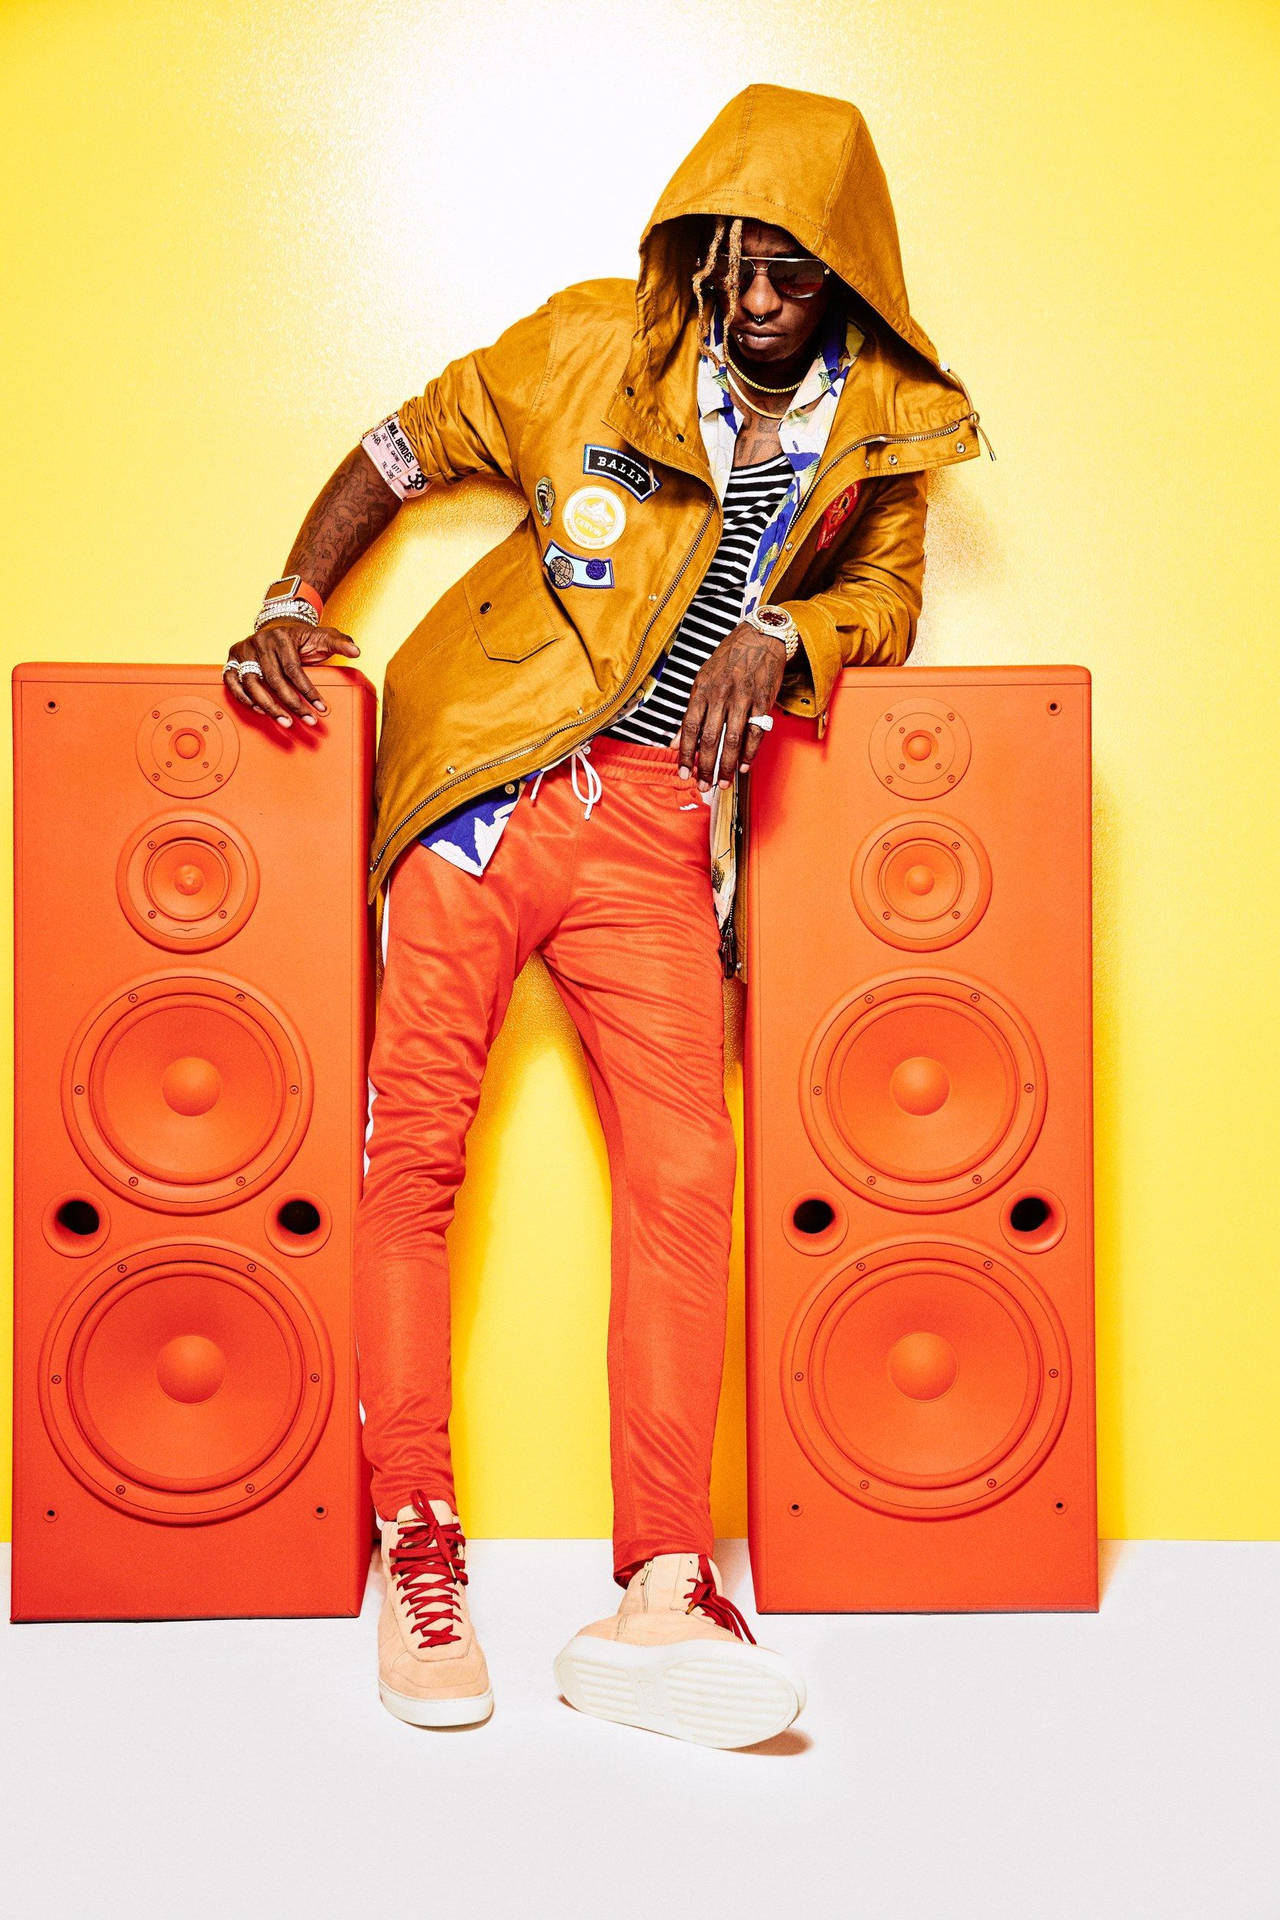 Young Thug expresses his eccentricity with an orange phone. Wallpaper